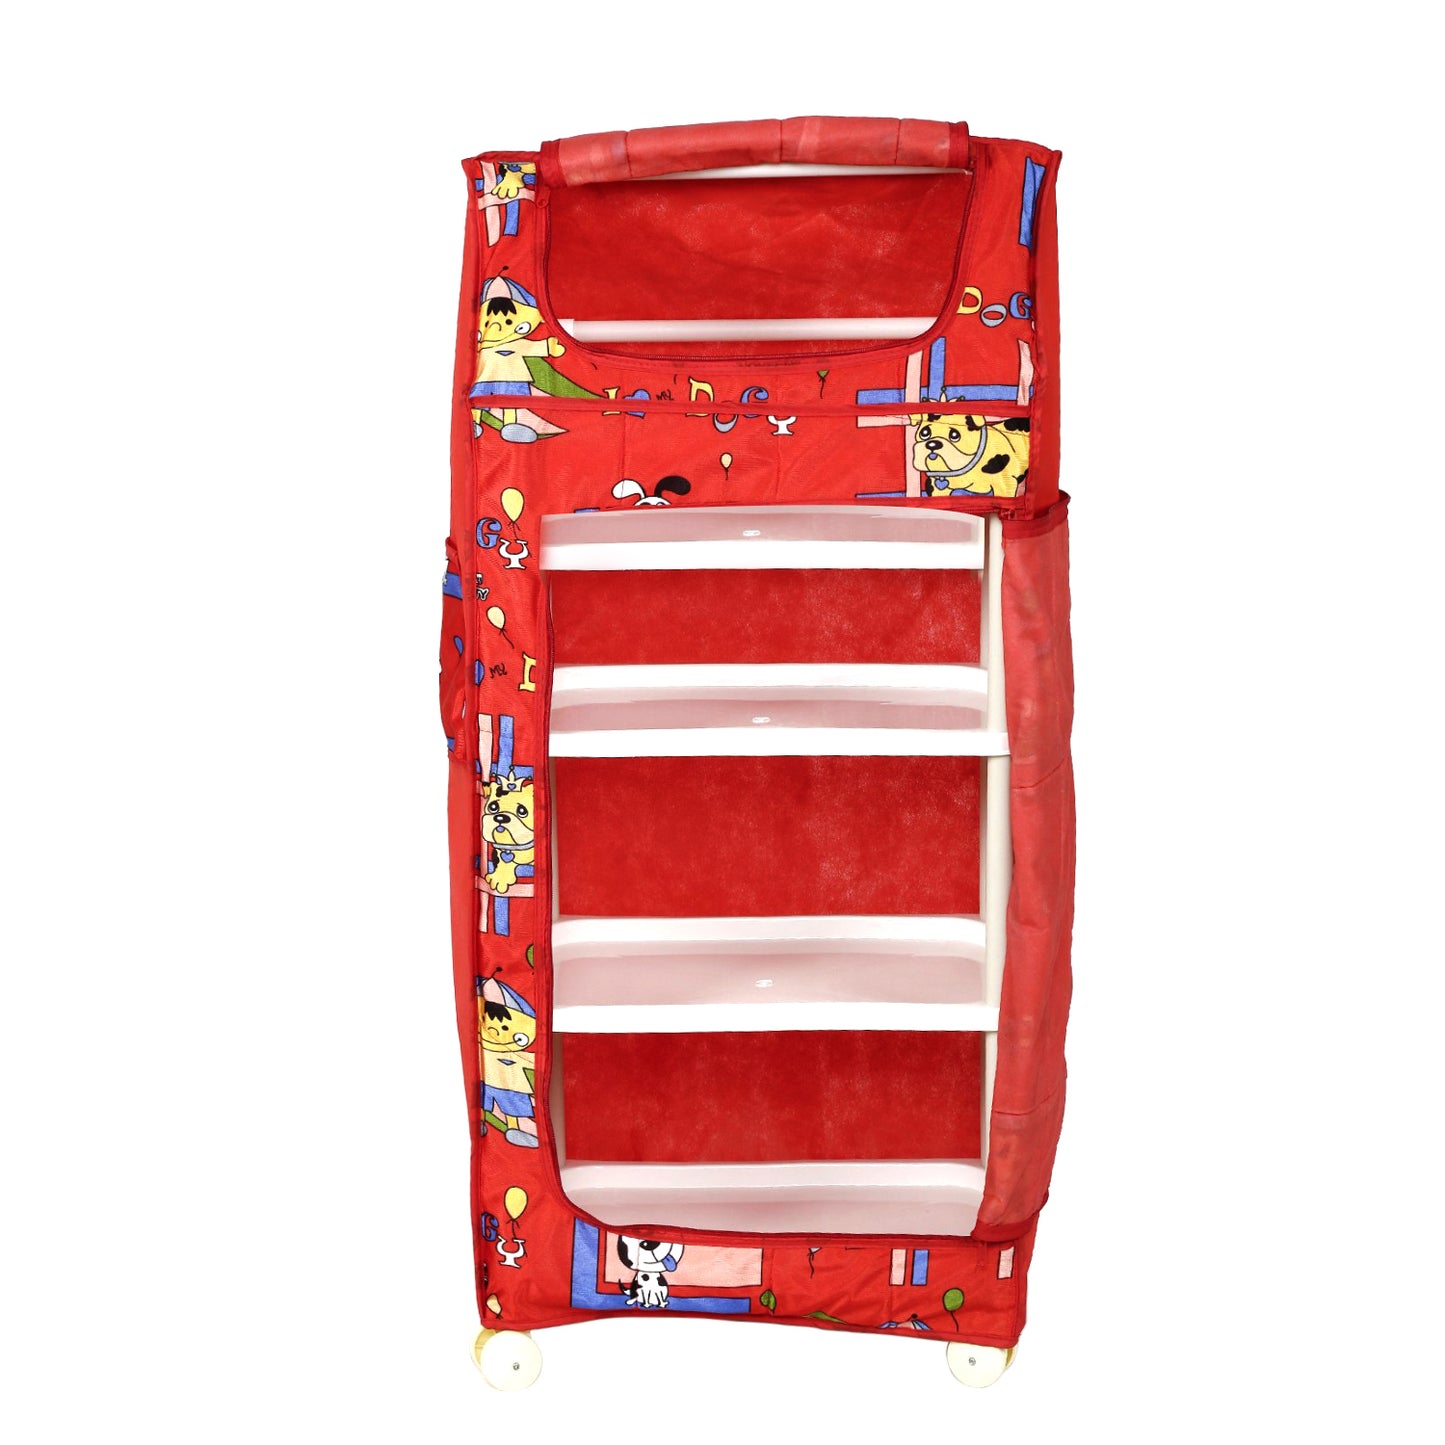 NHR Multipurpose Foldable/Collapsible Premium Plastic 5 Shelf Baby Almirah With Wheels  (5 Shelf, Red)